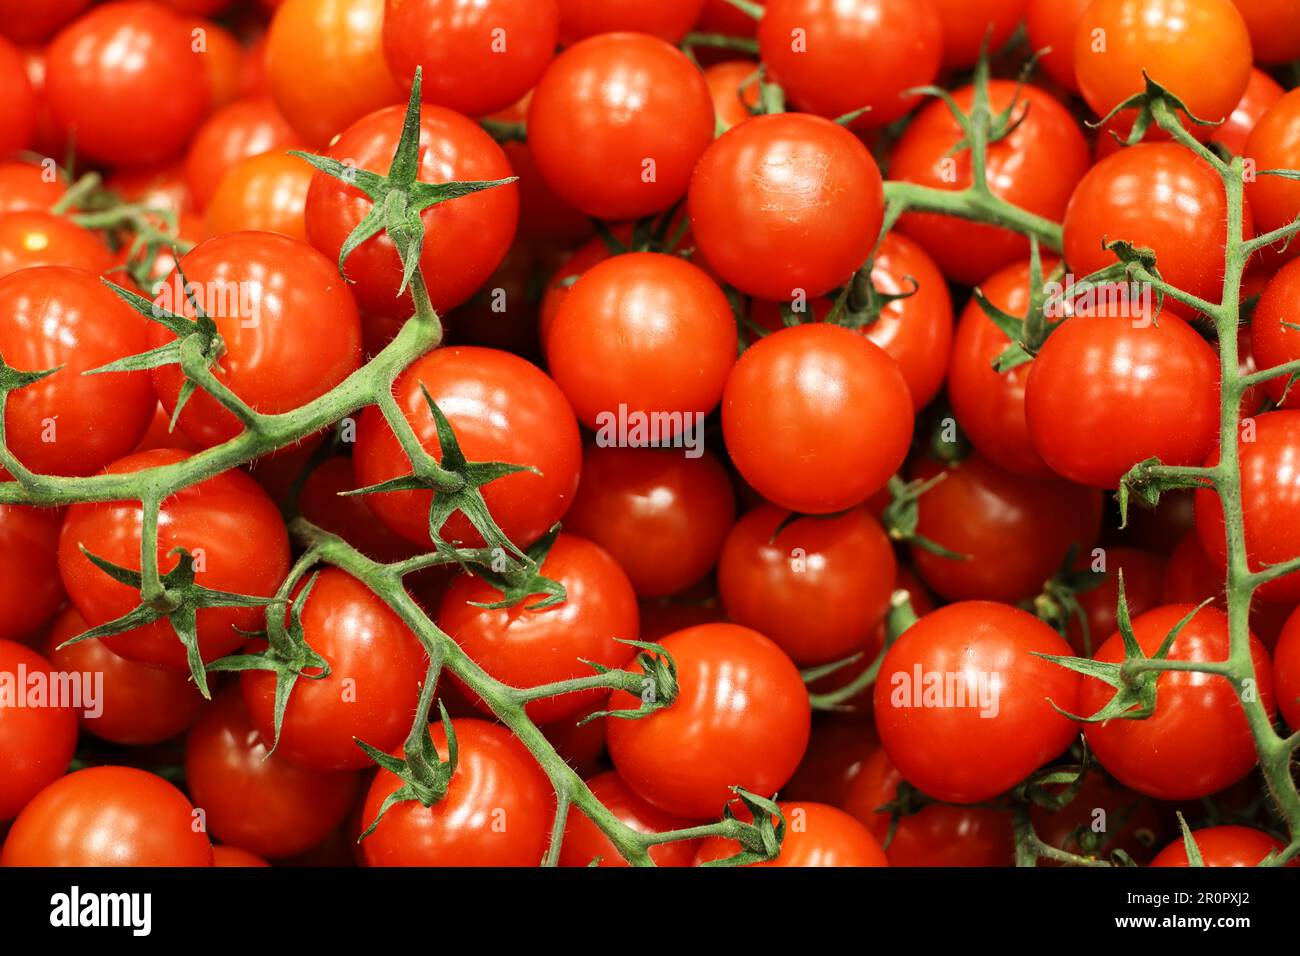 Red cherry tomatoes on green twigs, fresh vegetables in the market Stock Photo